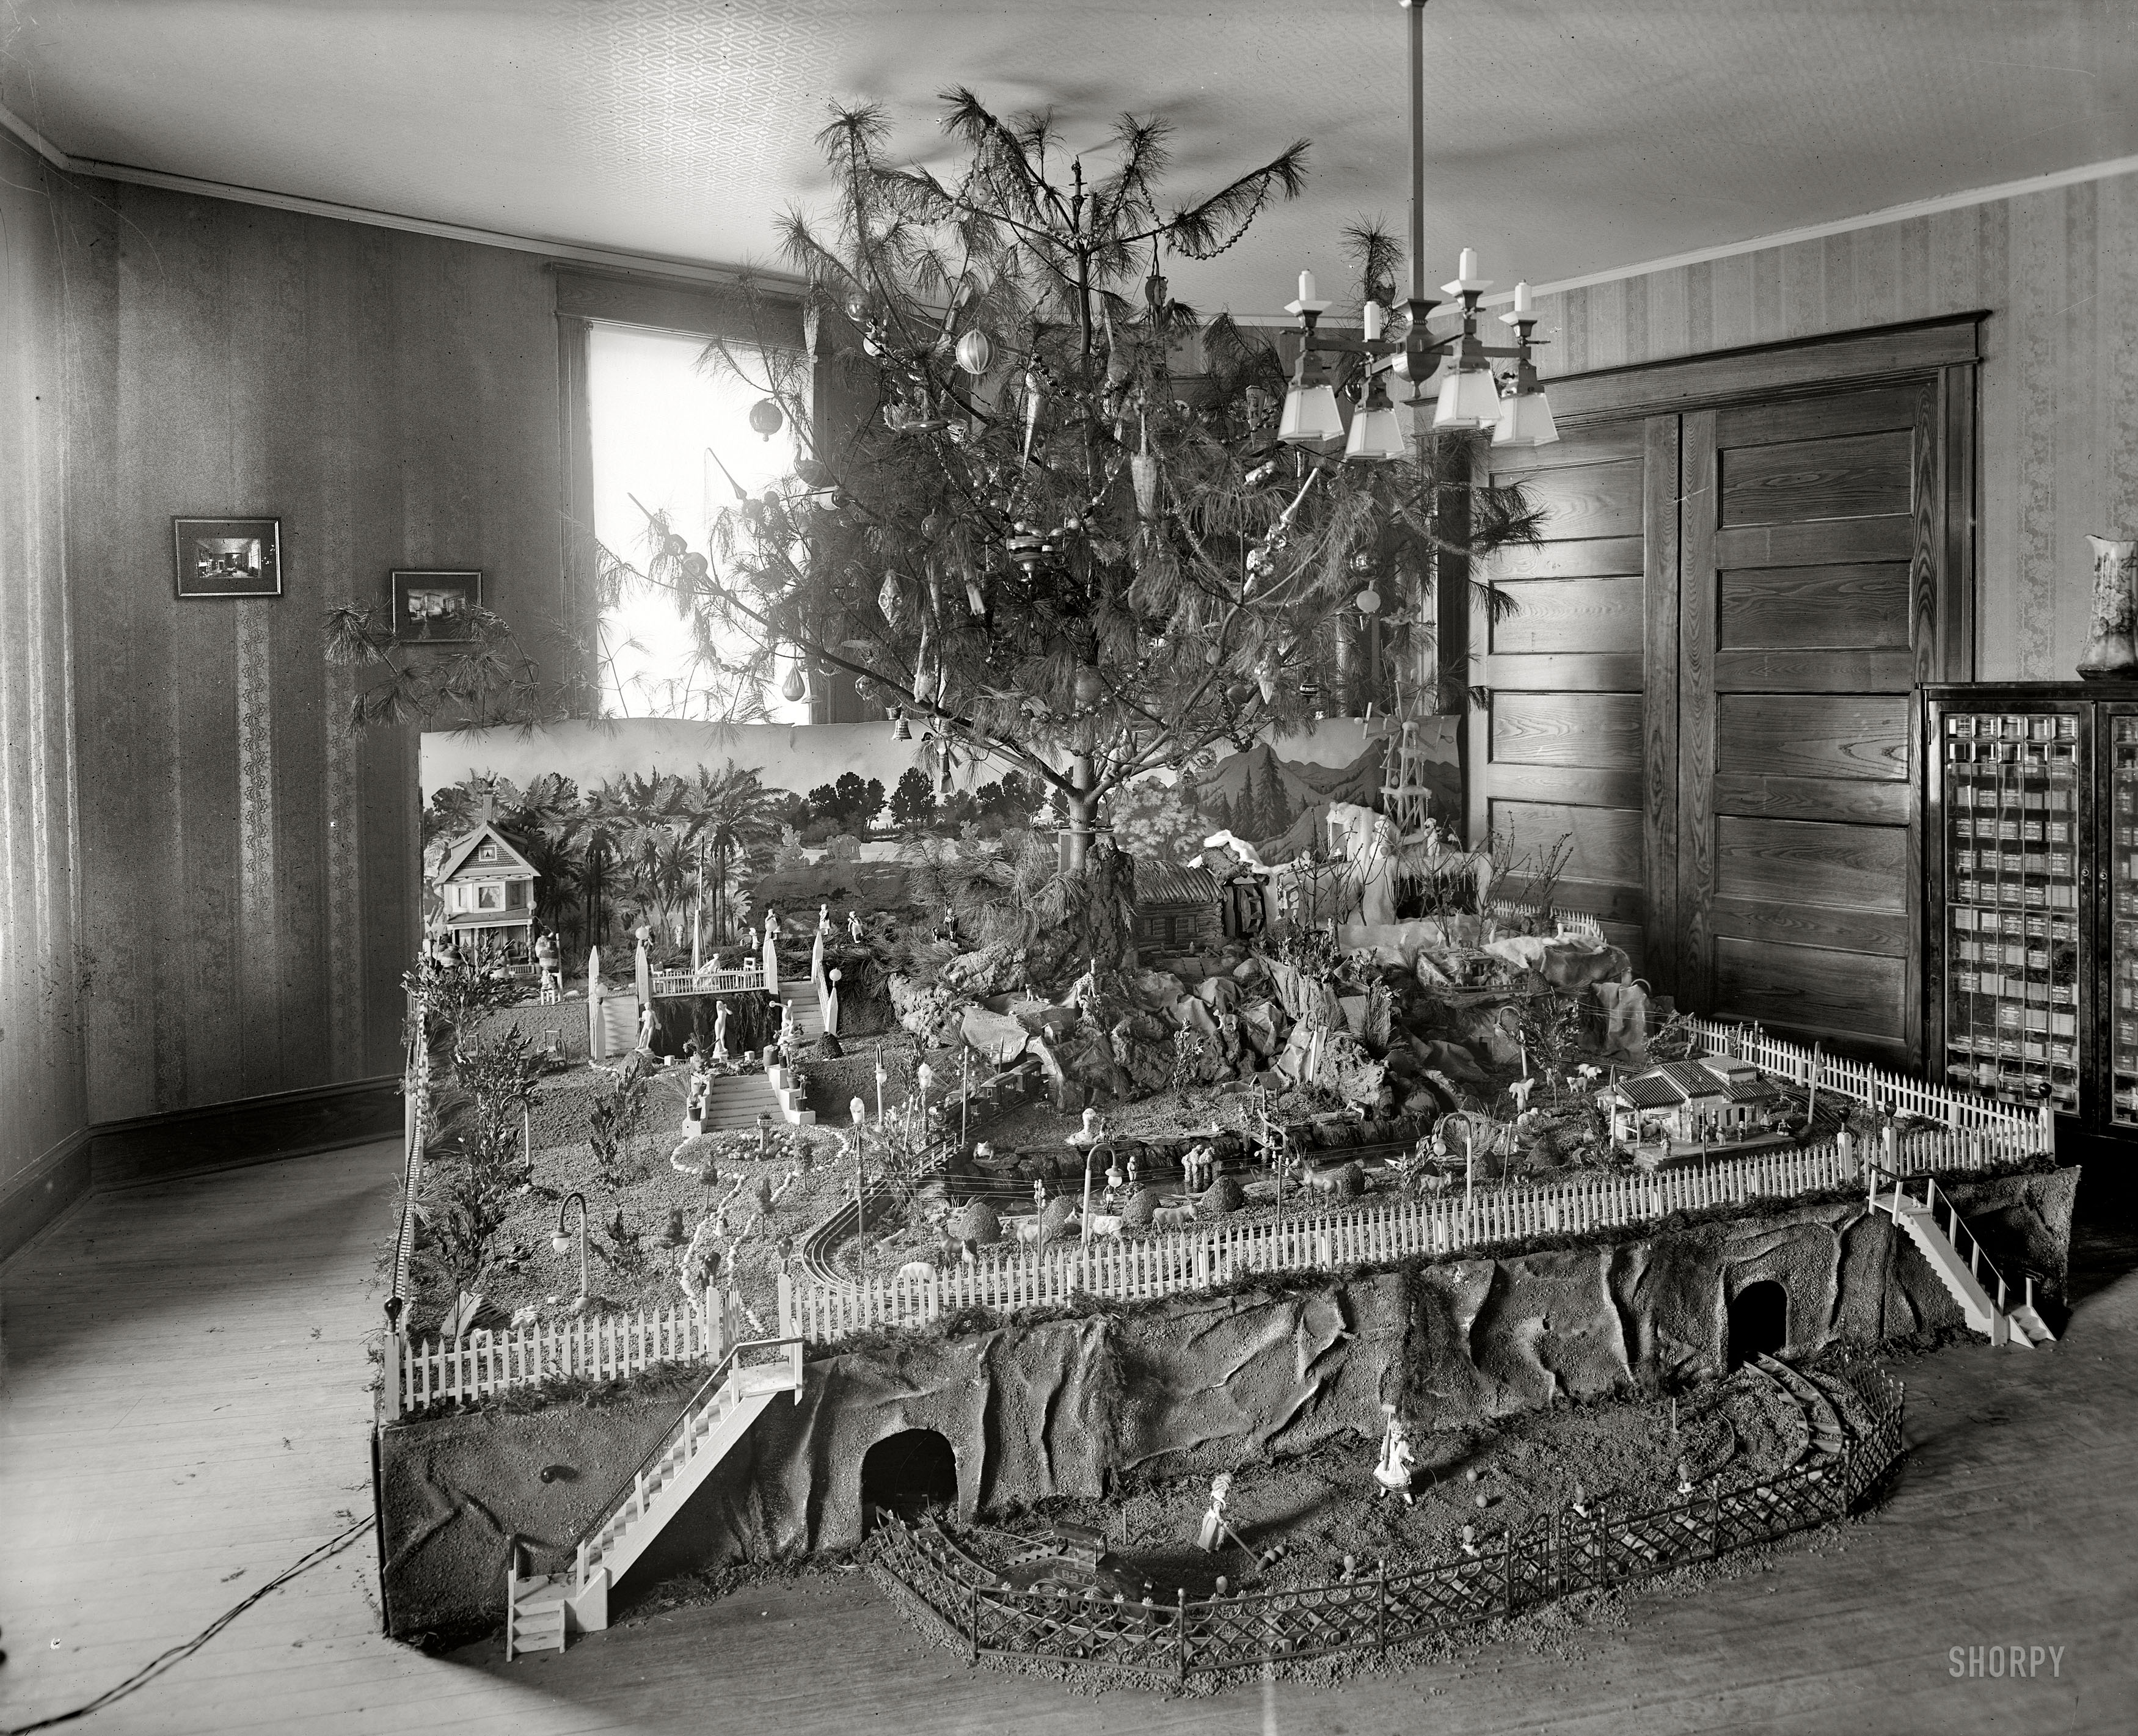 Washington, D.C., circa 1920. "Mrs. A.M. Keen. Christmas tree." Somewhere in there: a very tiny kitchen sink. Harris & Ewing glass negative. View full size.